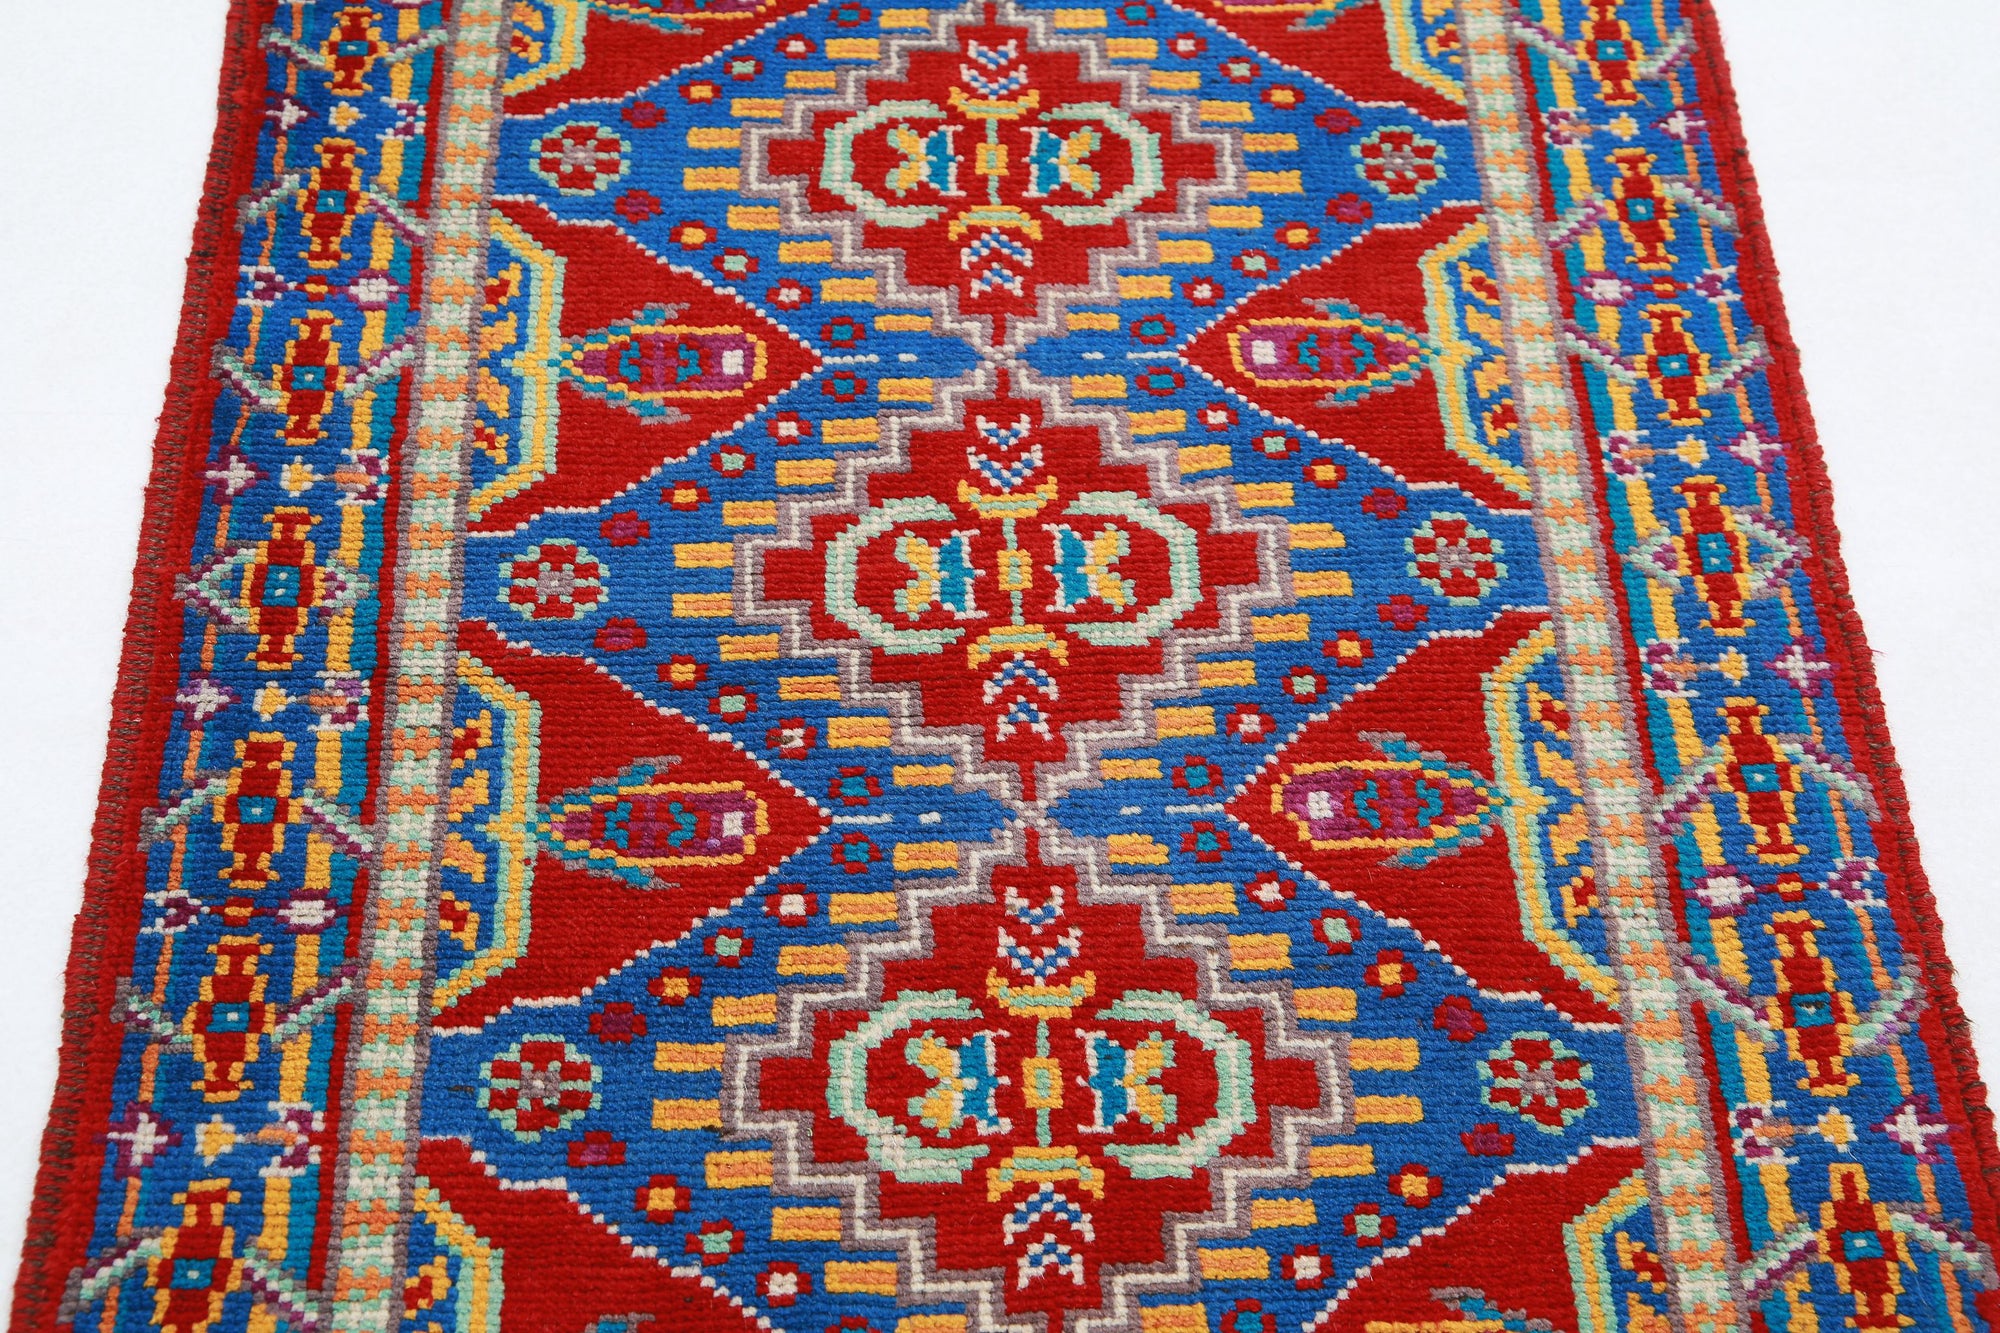 Revival-hand-knotted-qarghani-wool-rug-5014007-4.jpg